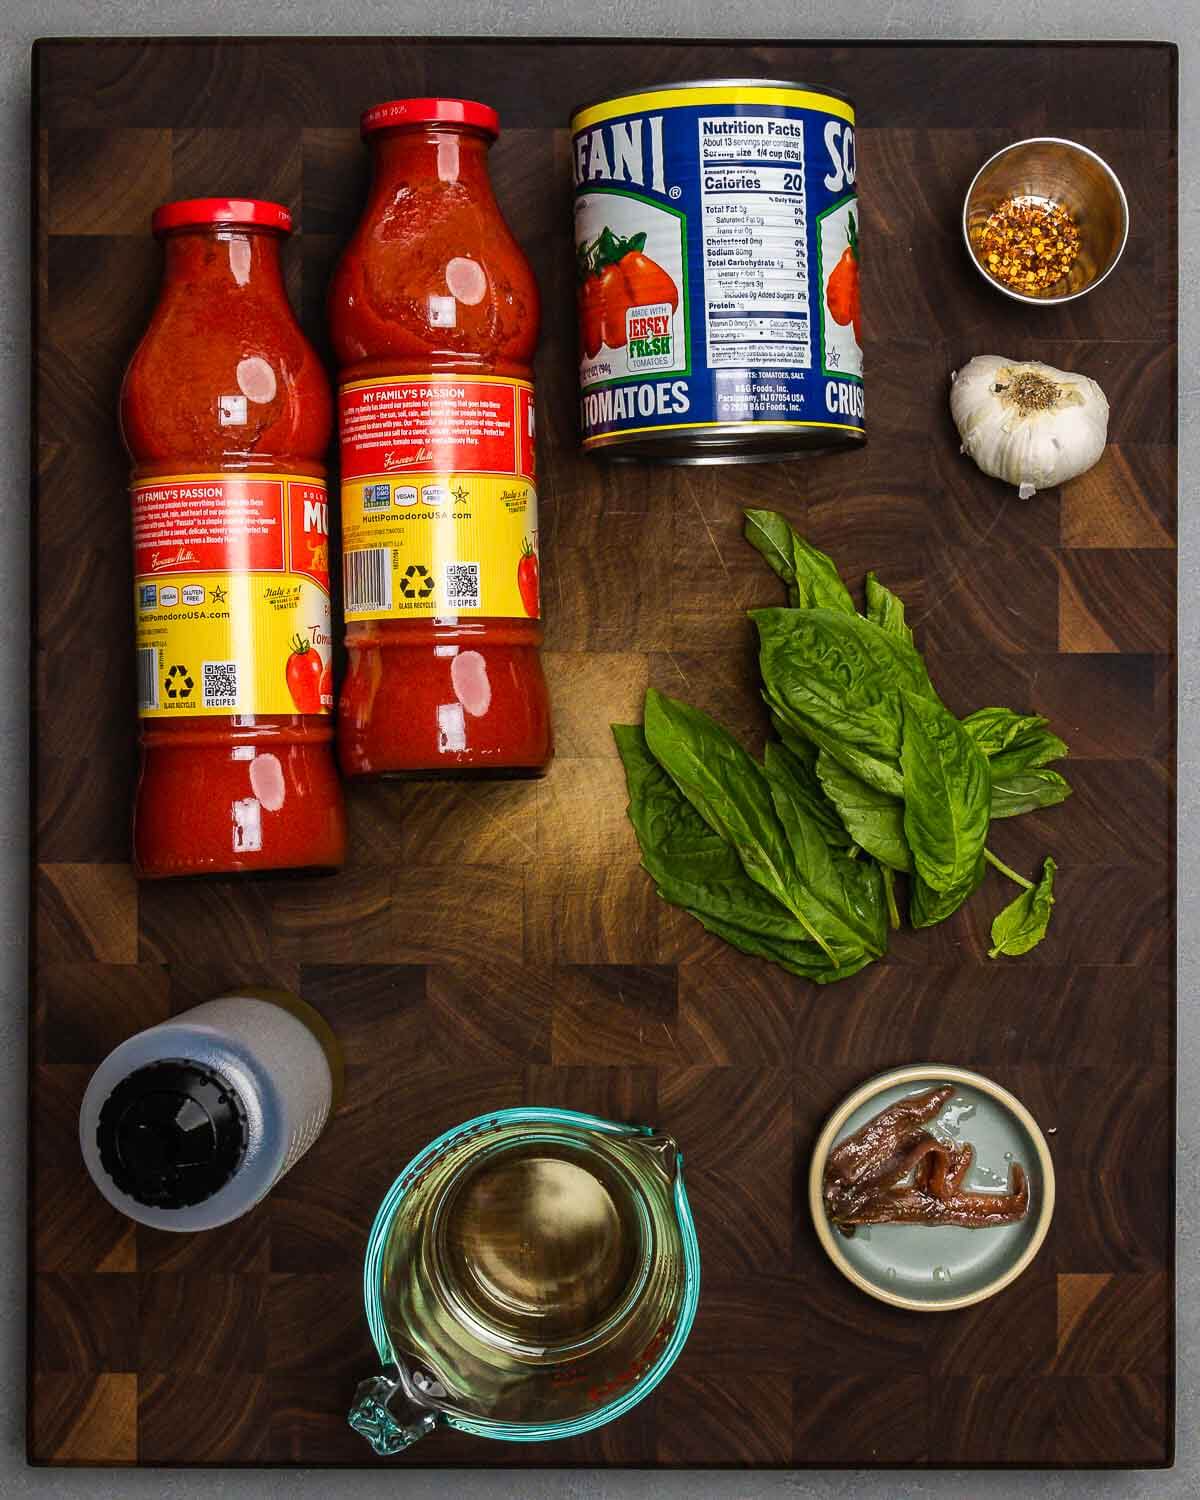 Sauce ingredients shown: passata, crushed tomatoes, garlic, hot red pepper flakes, olive oil, white wine, basil, and anchovies.